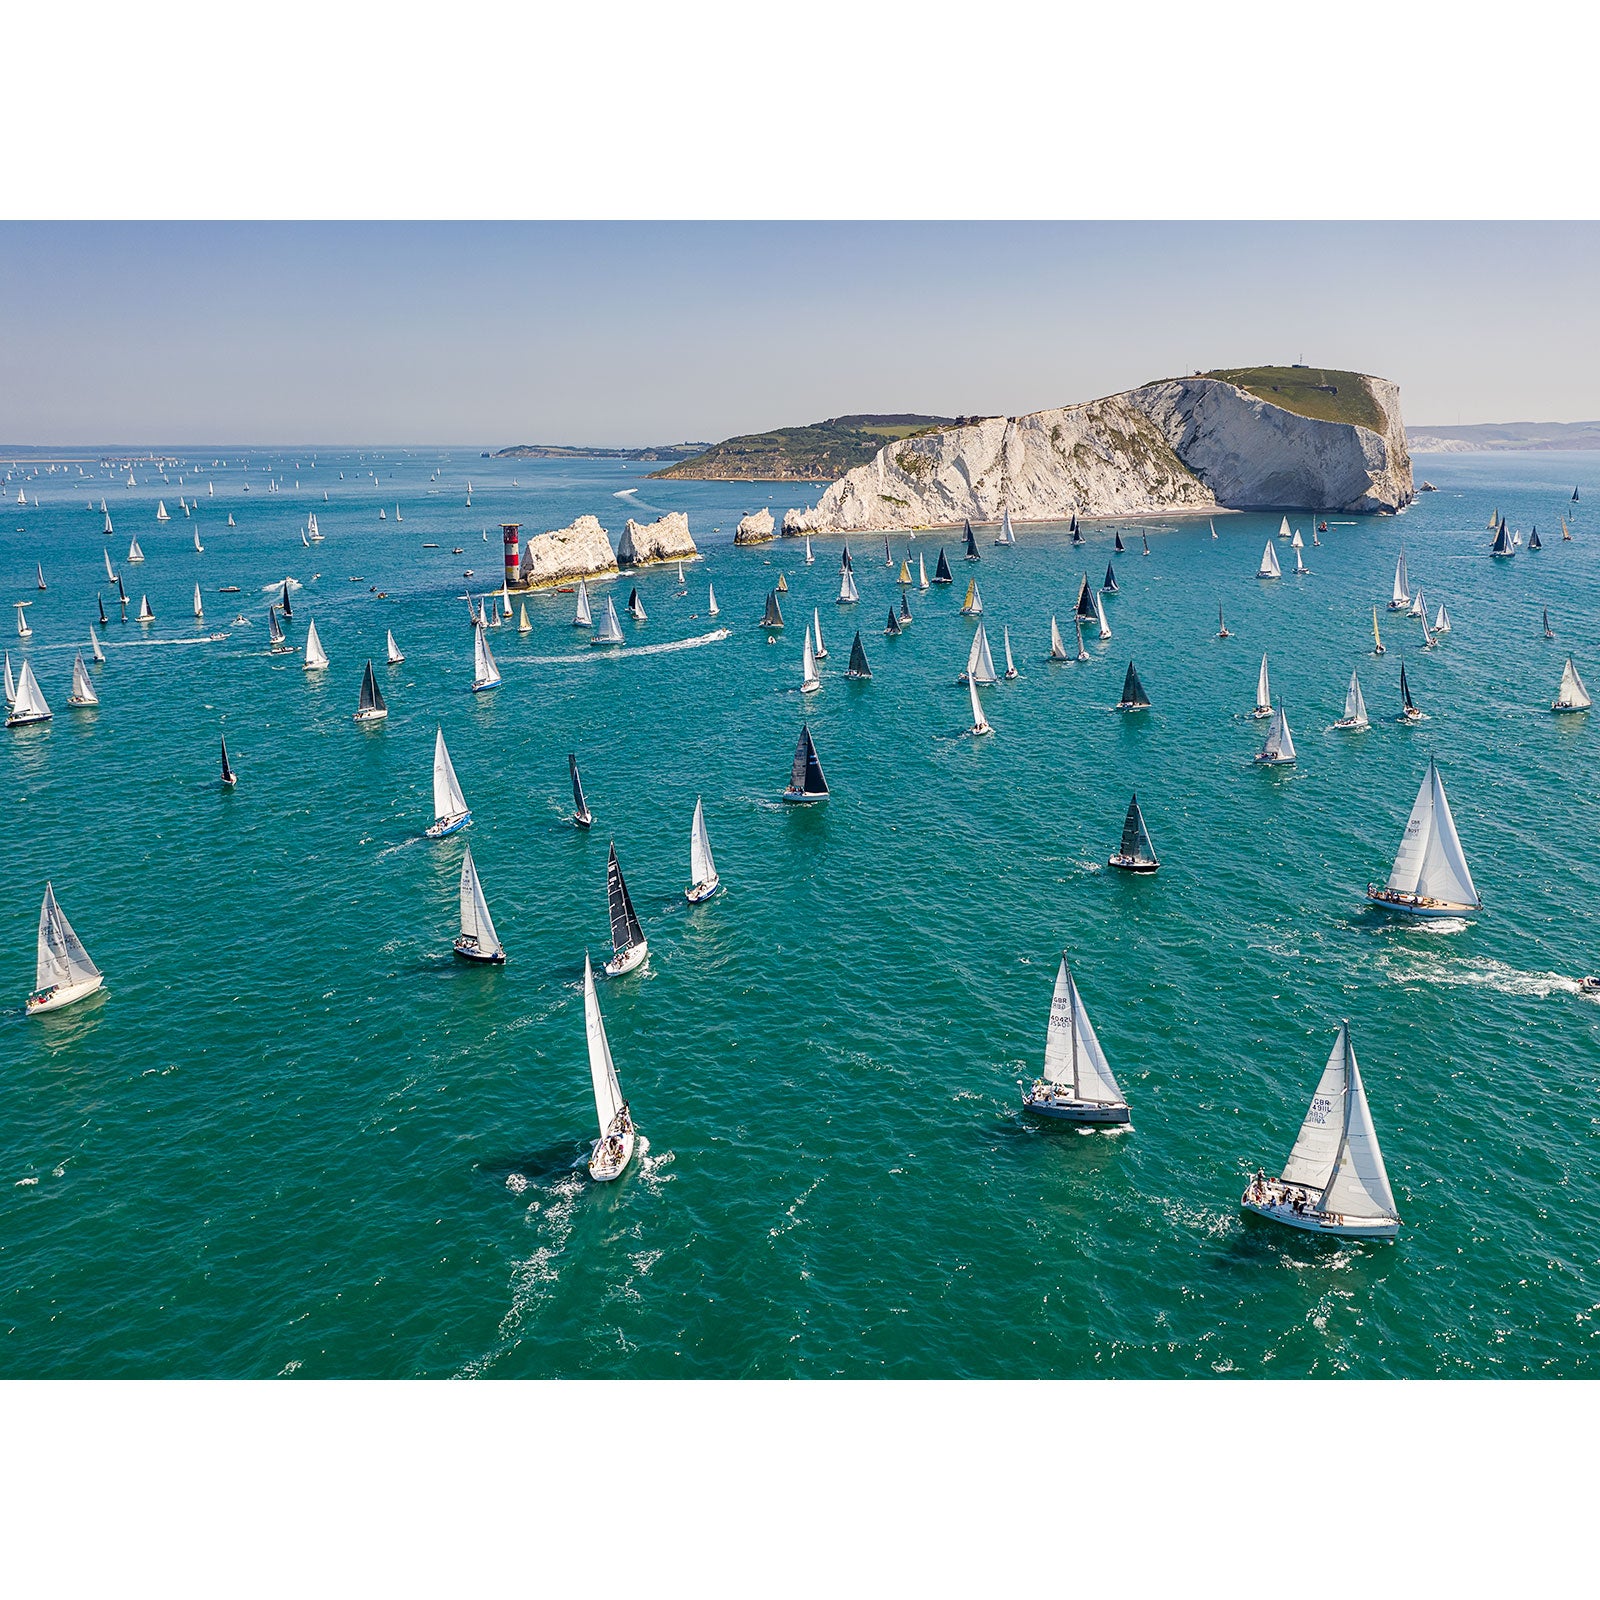 A fleet of Round the Island Race sailboats racing near a coastal cliff on the Isle of Wight on a clear day, captured by Available Light Photography.